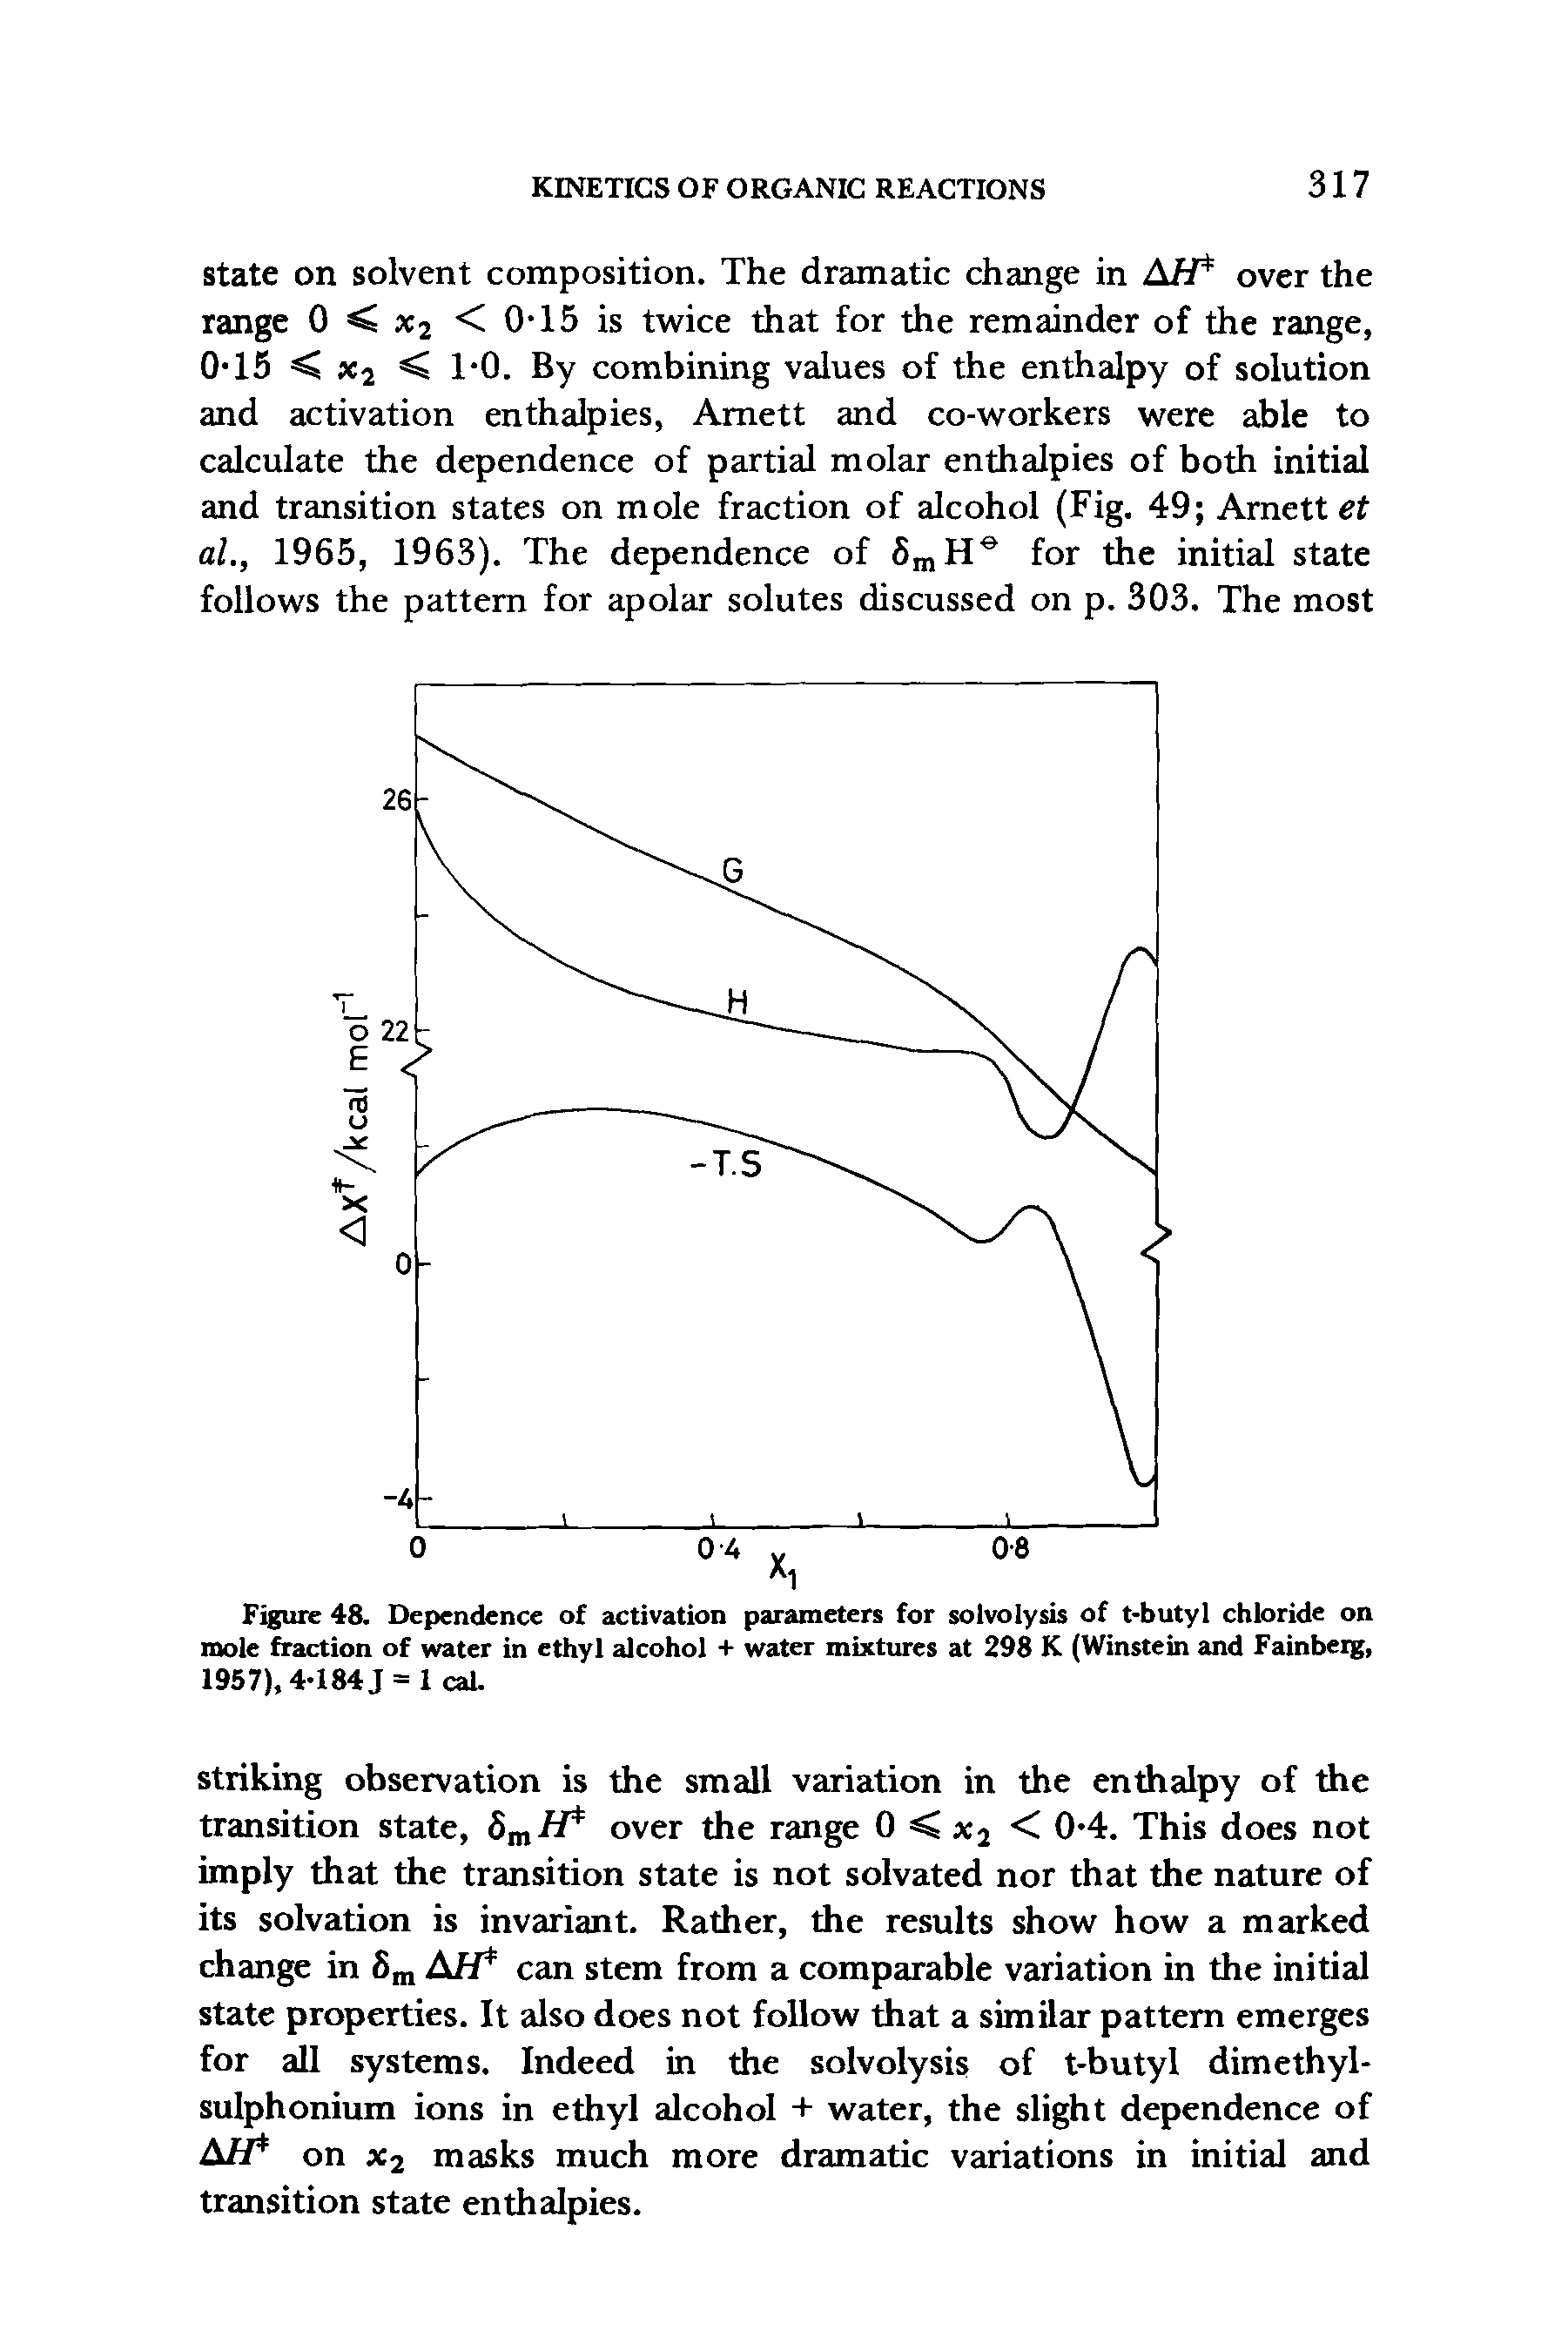 Figure 48. Dependence of activation parameters for solvolysis of t-butyl chloride on mole fraction of water in ethyl alcohol + water mixtures at 298 K (Winstein and Fainberg, 1957), 4-184J = 1 cal.